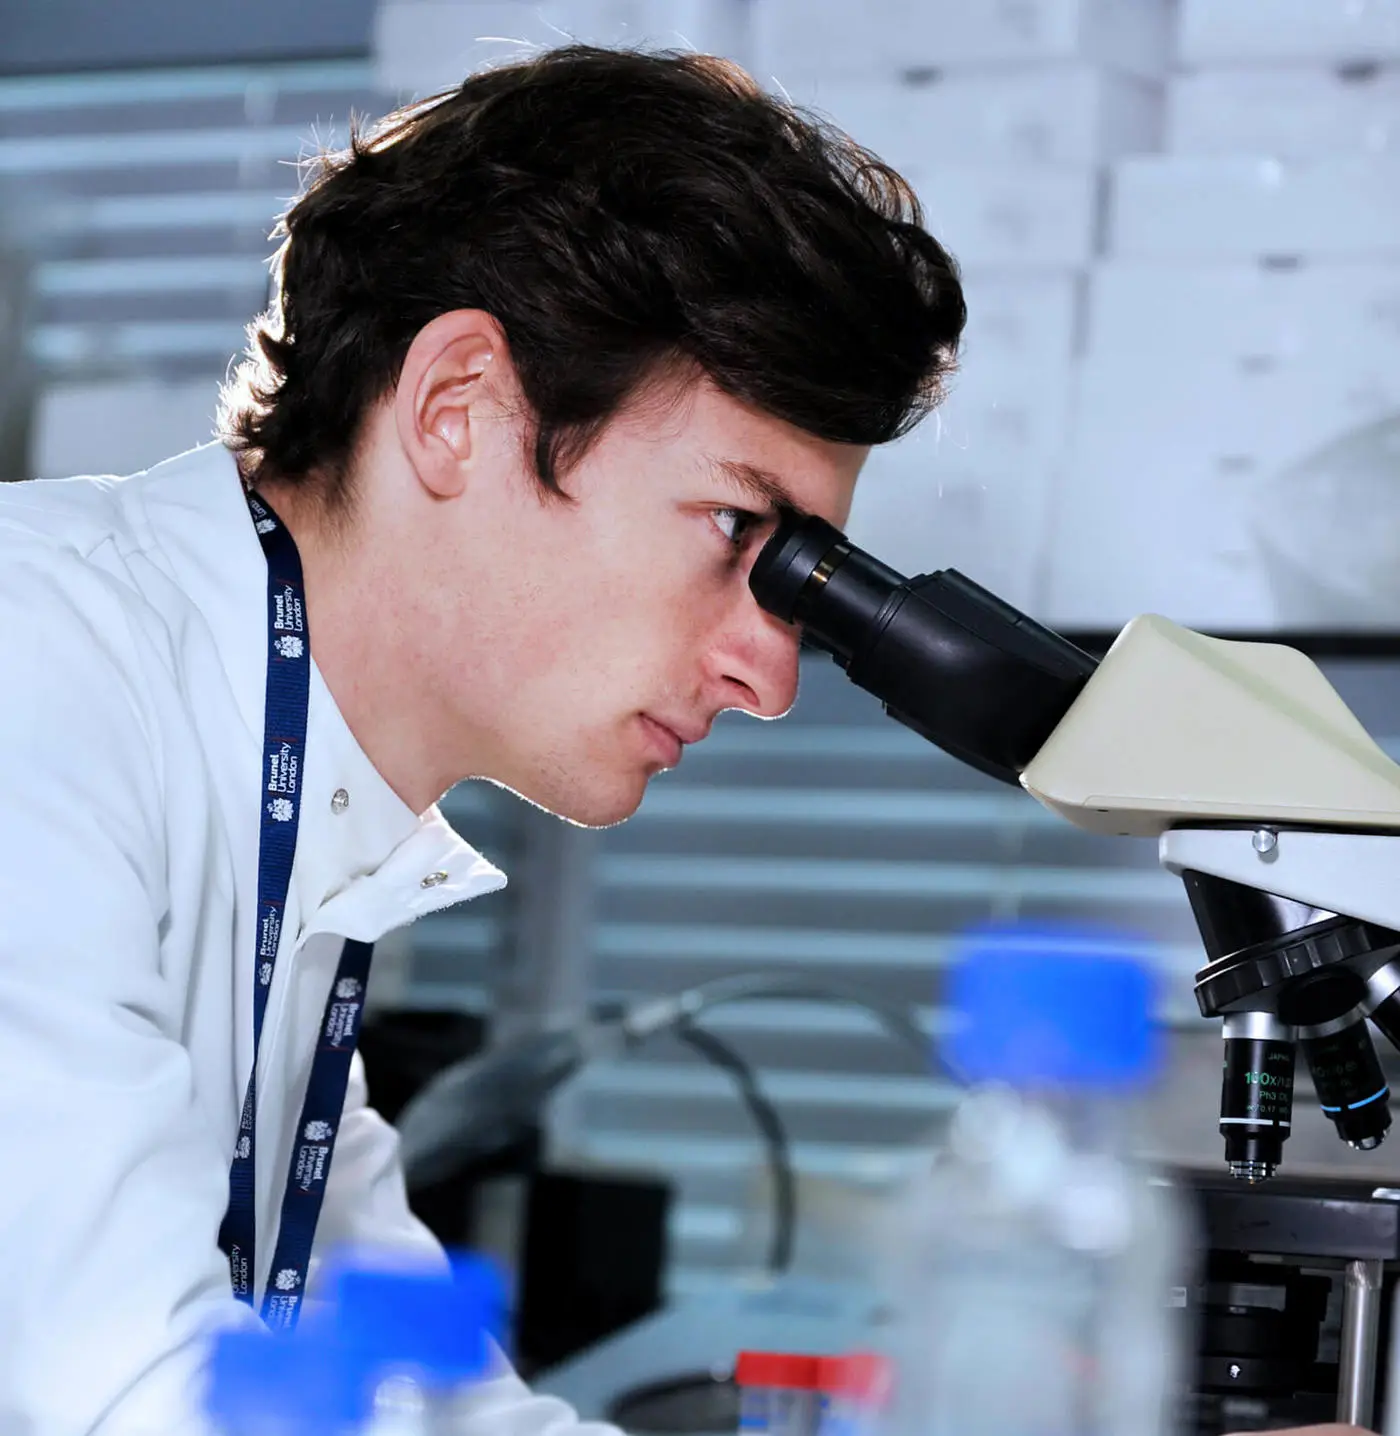 Male student looking through microscope in a bioscience lab